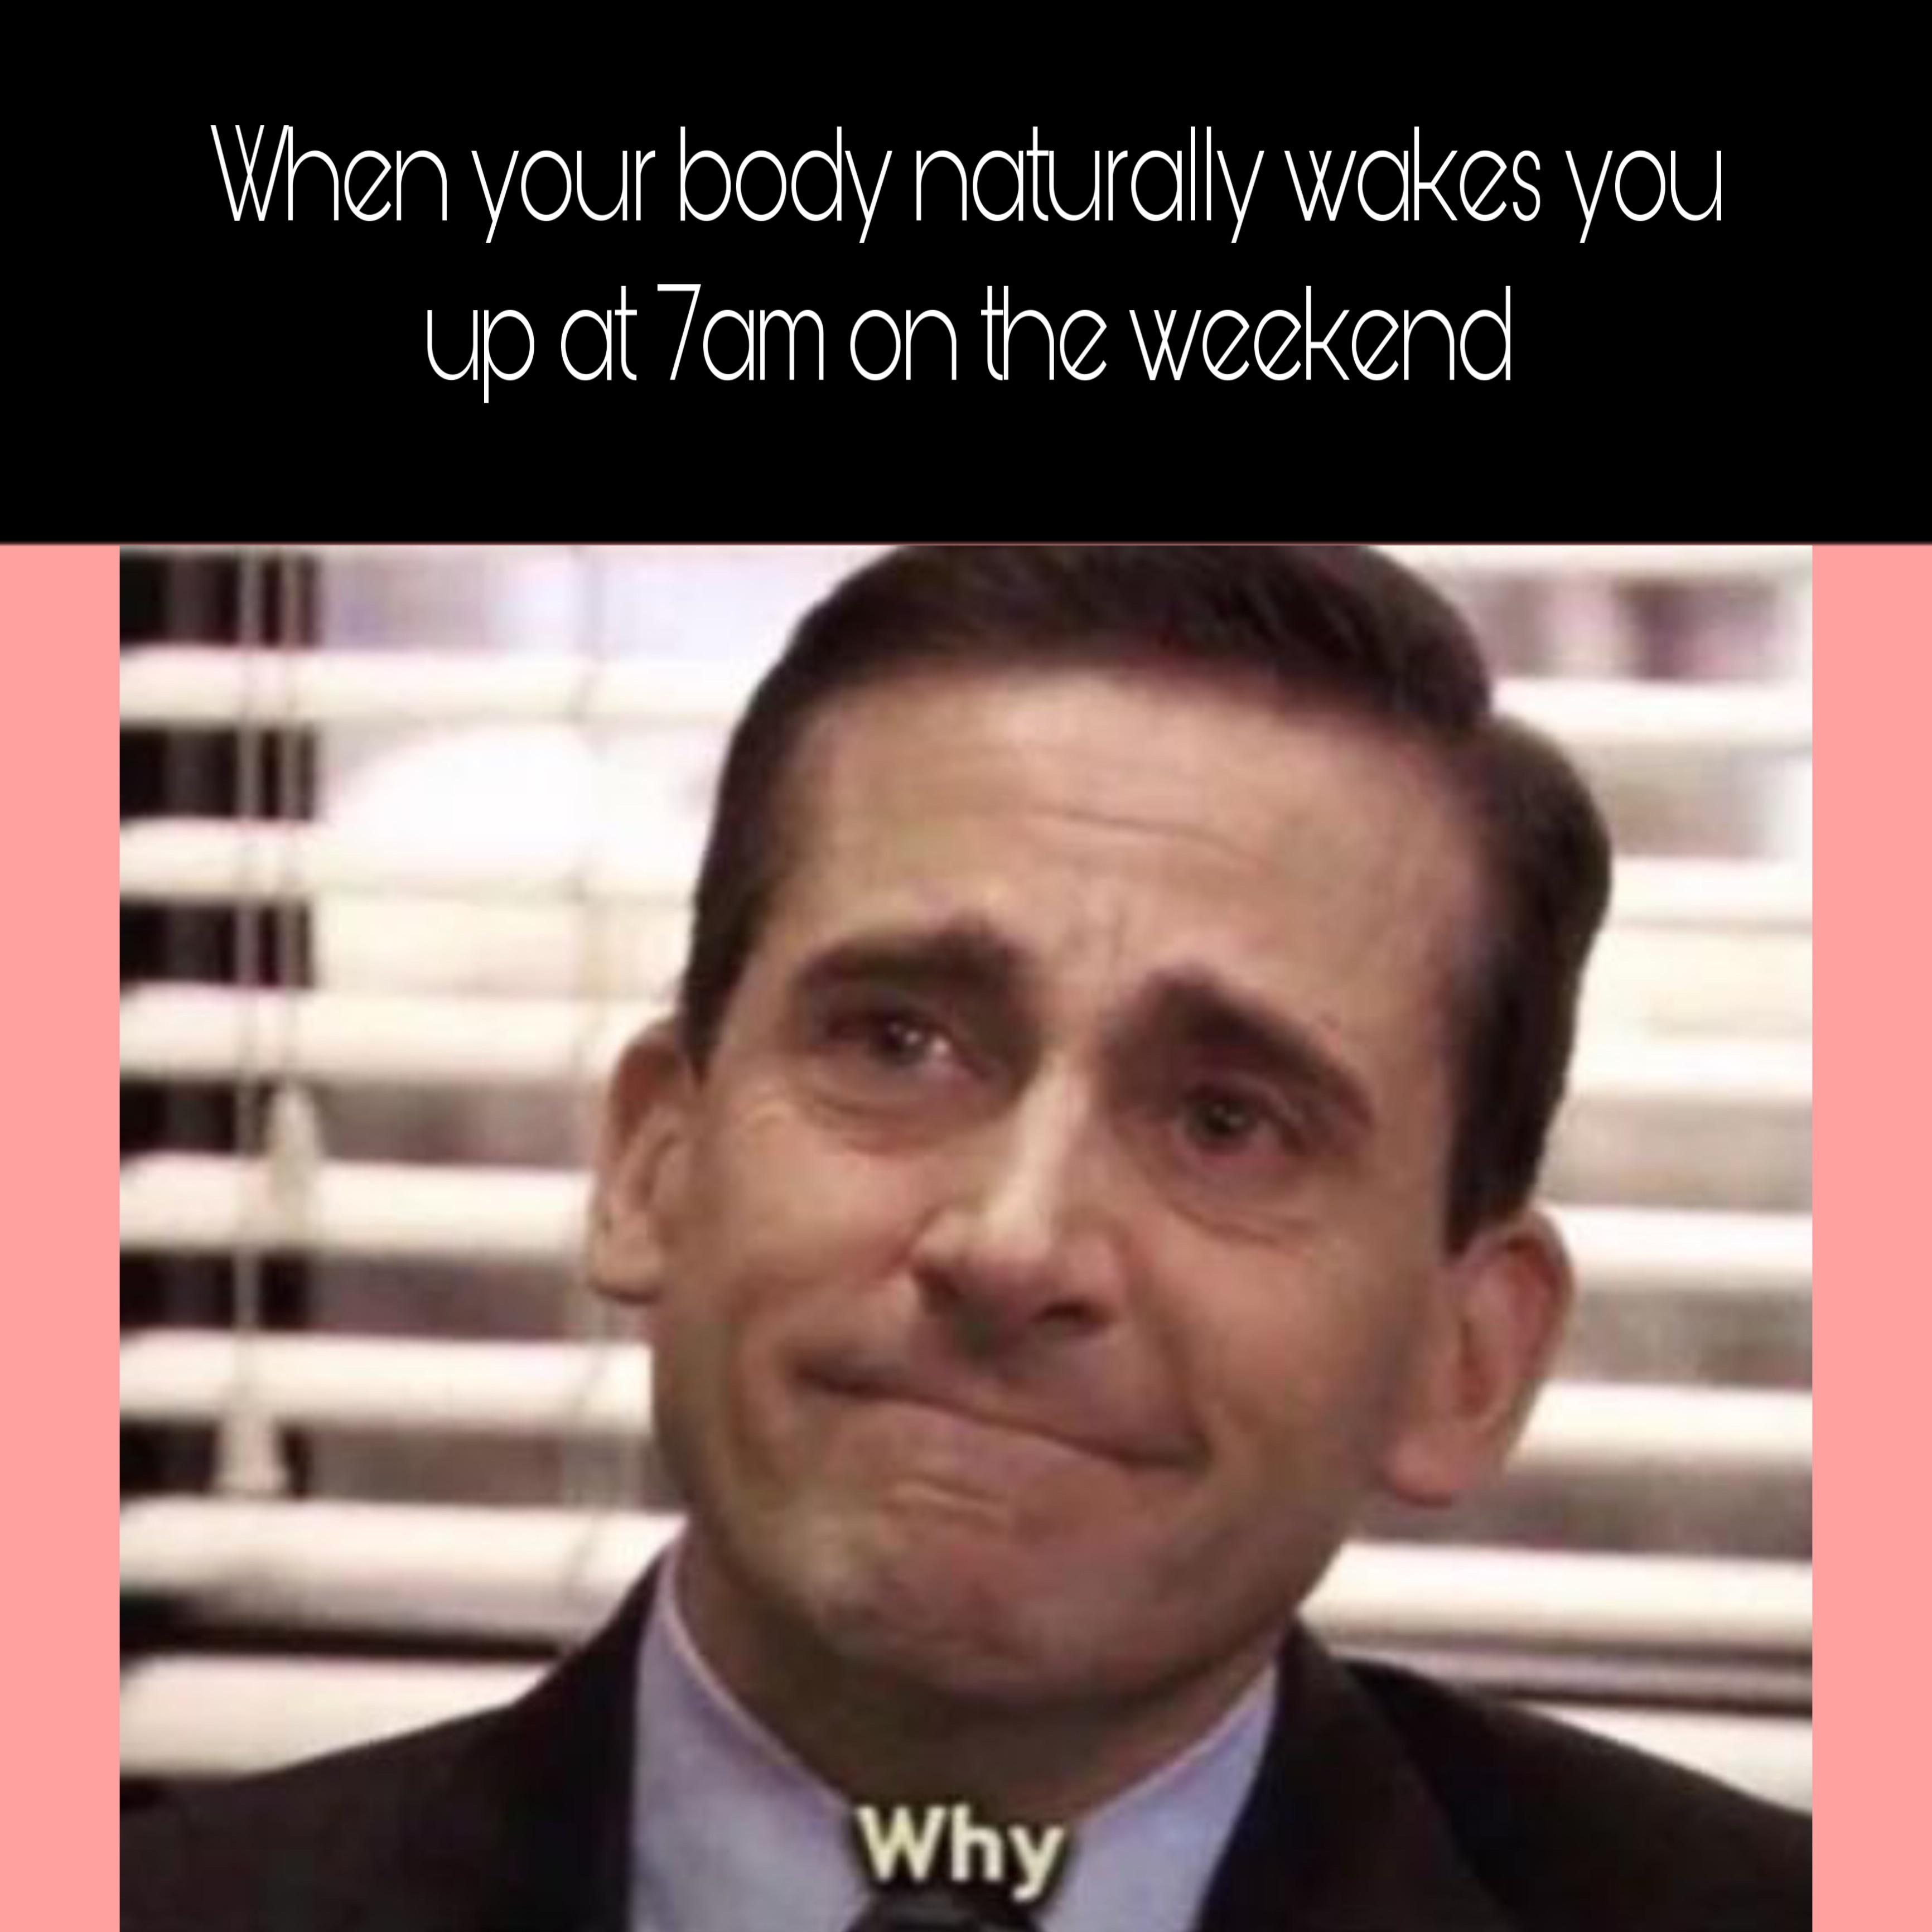 the office memes - internal screaming meme - When your body naturally wakes you up at 7am on the weekend Why